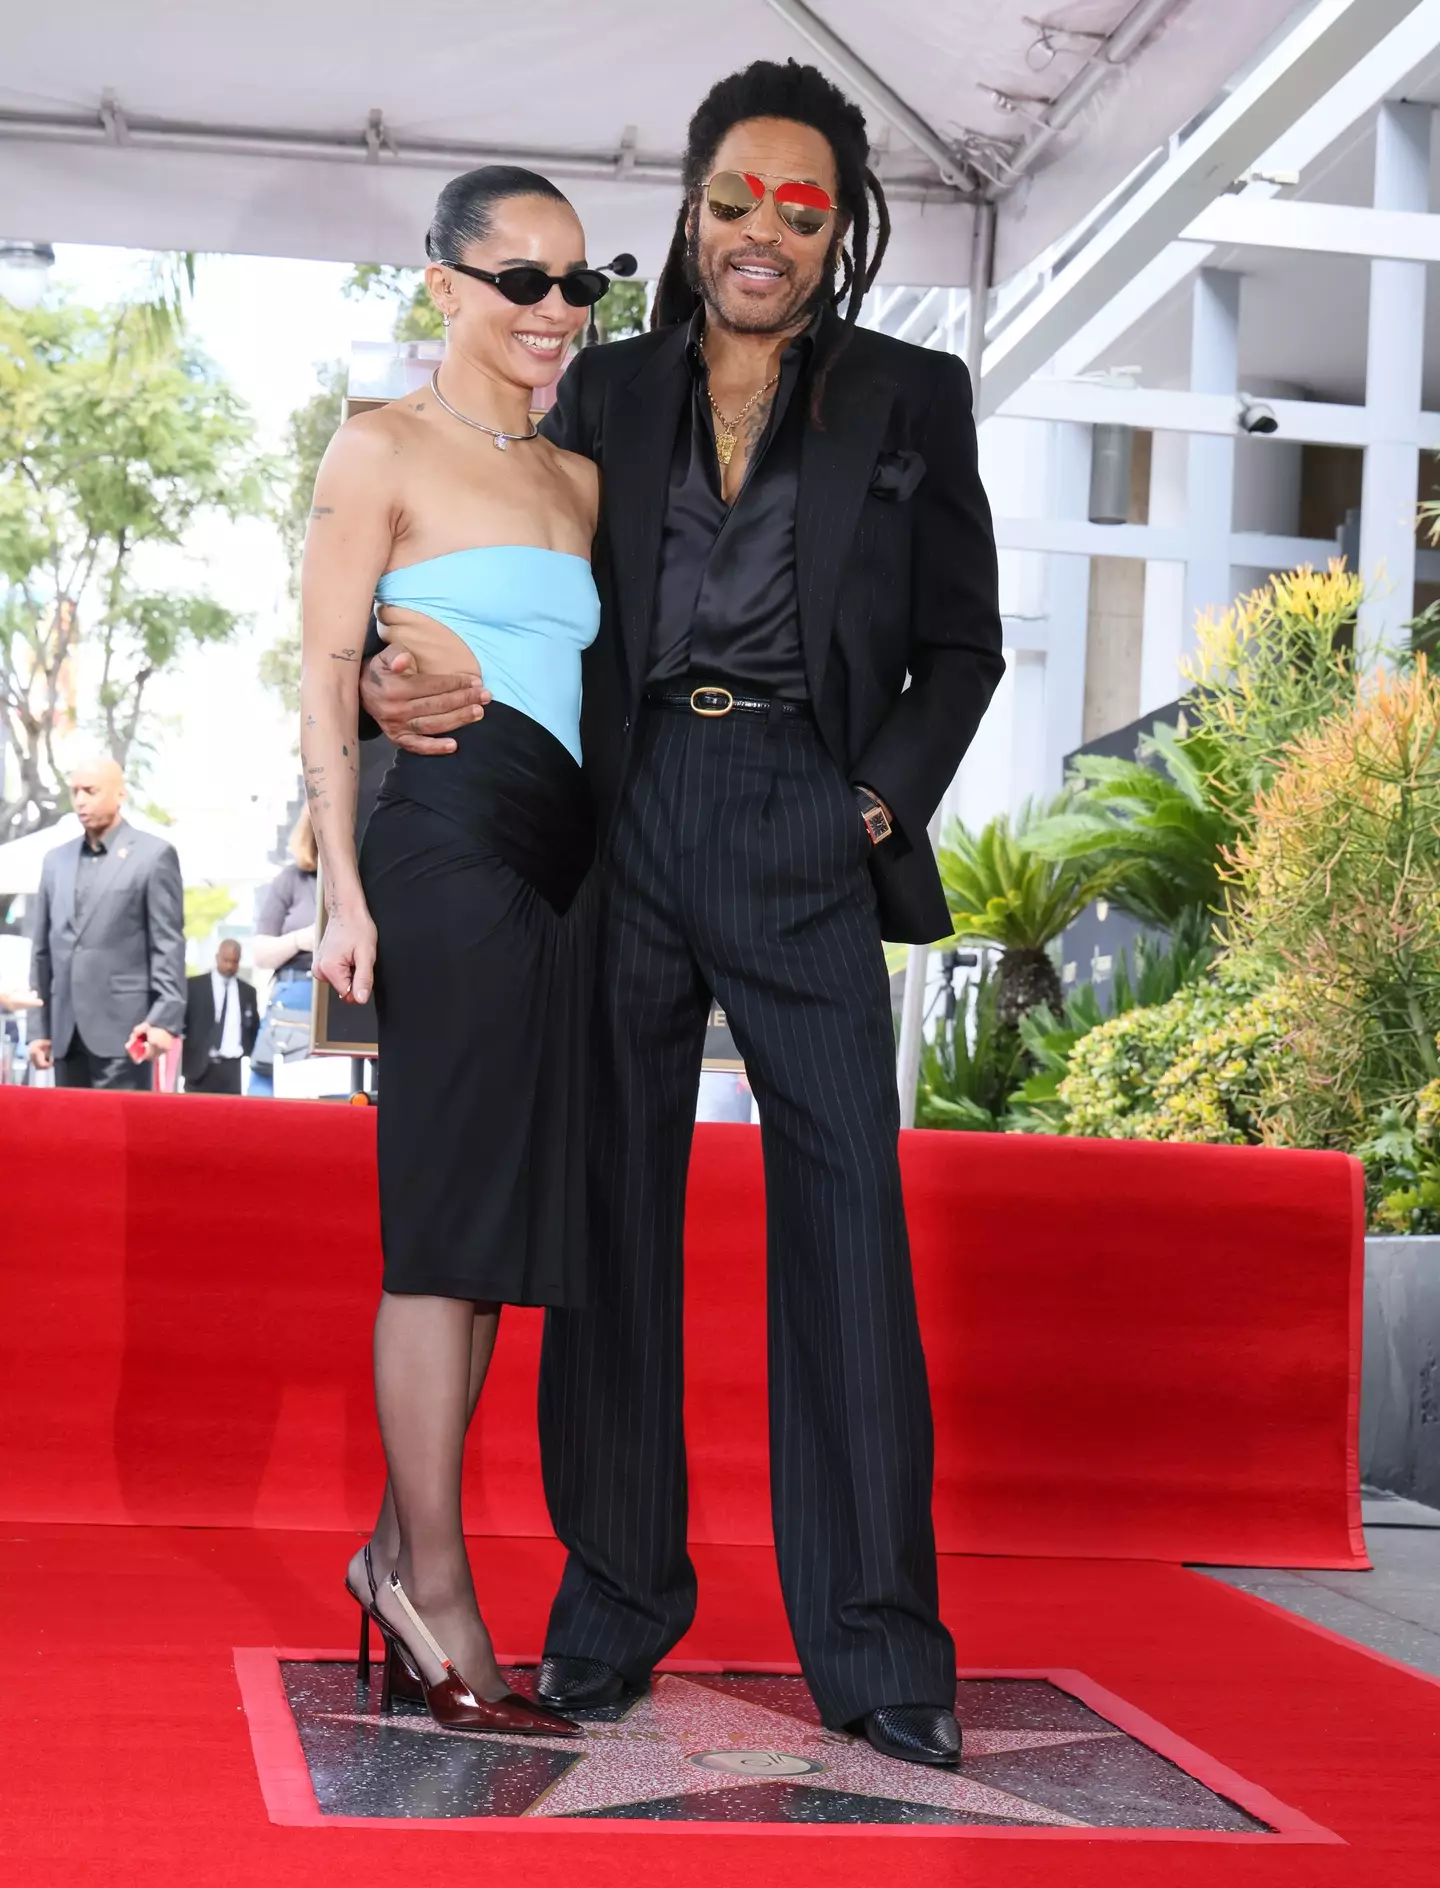 Lenny and Zoe Kravitz at his Hollywood Walk of Fame ceremony.